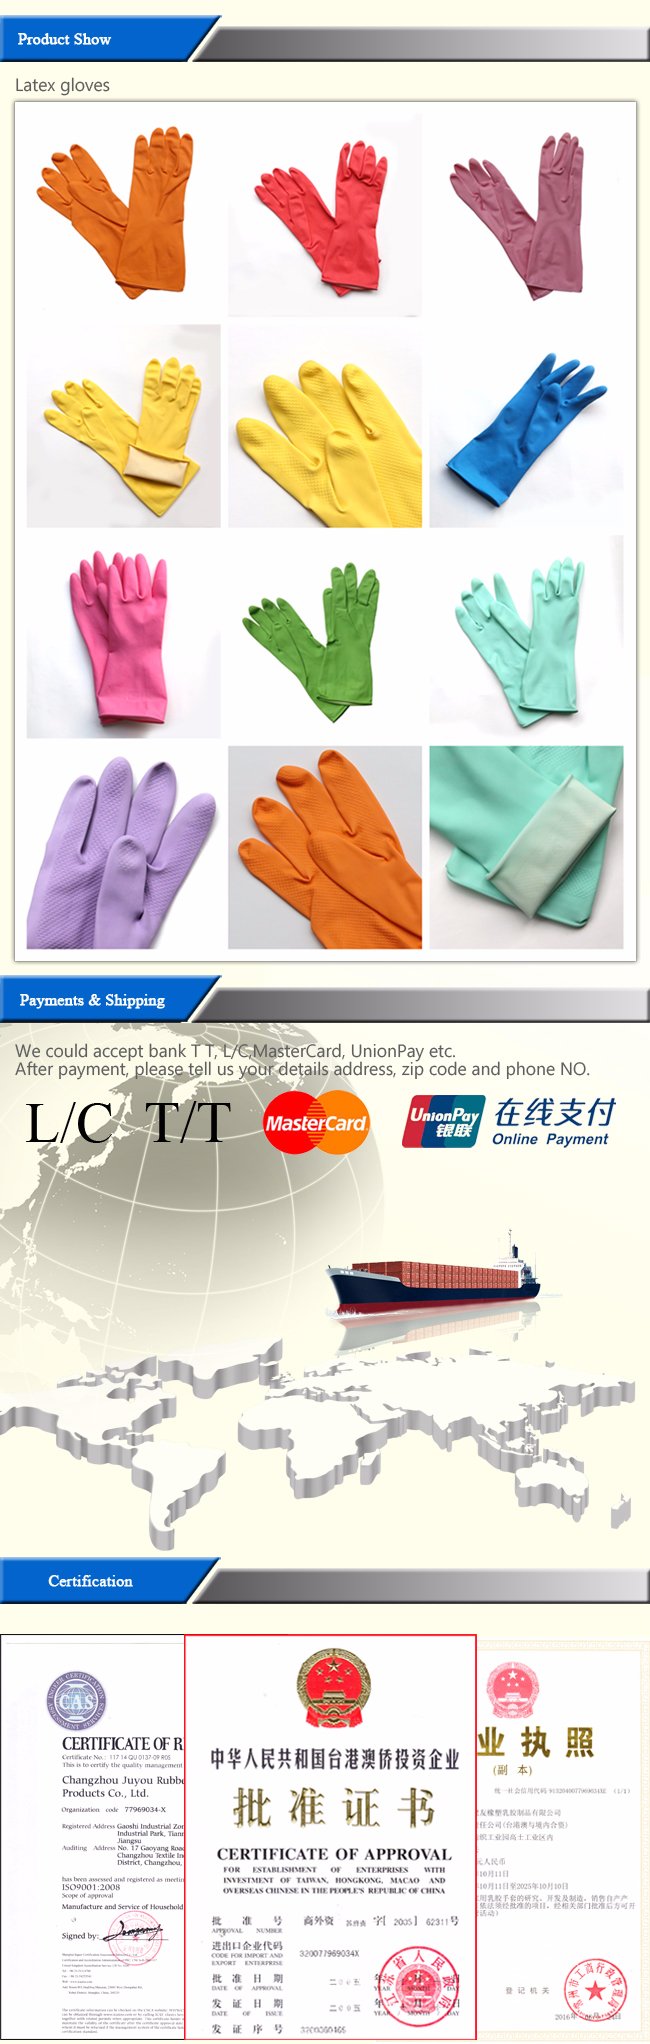 Anti Acid Working Work Waterproof Latex Gloves with ISO9001 Approved